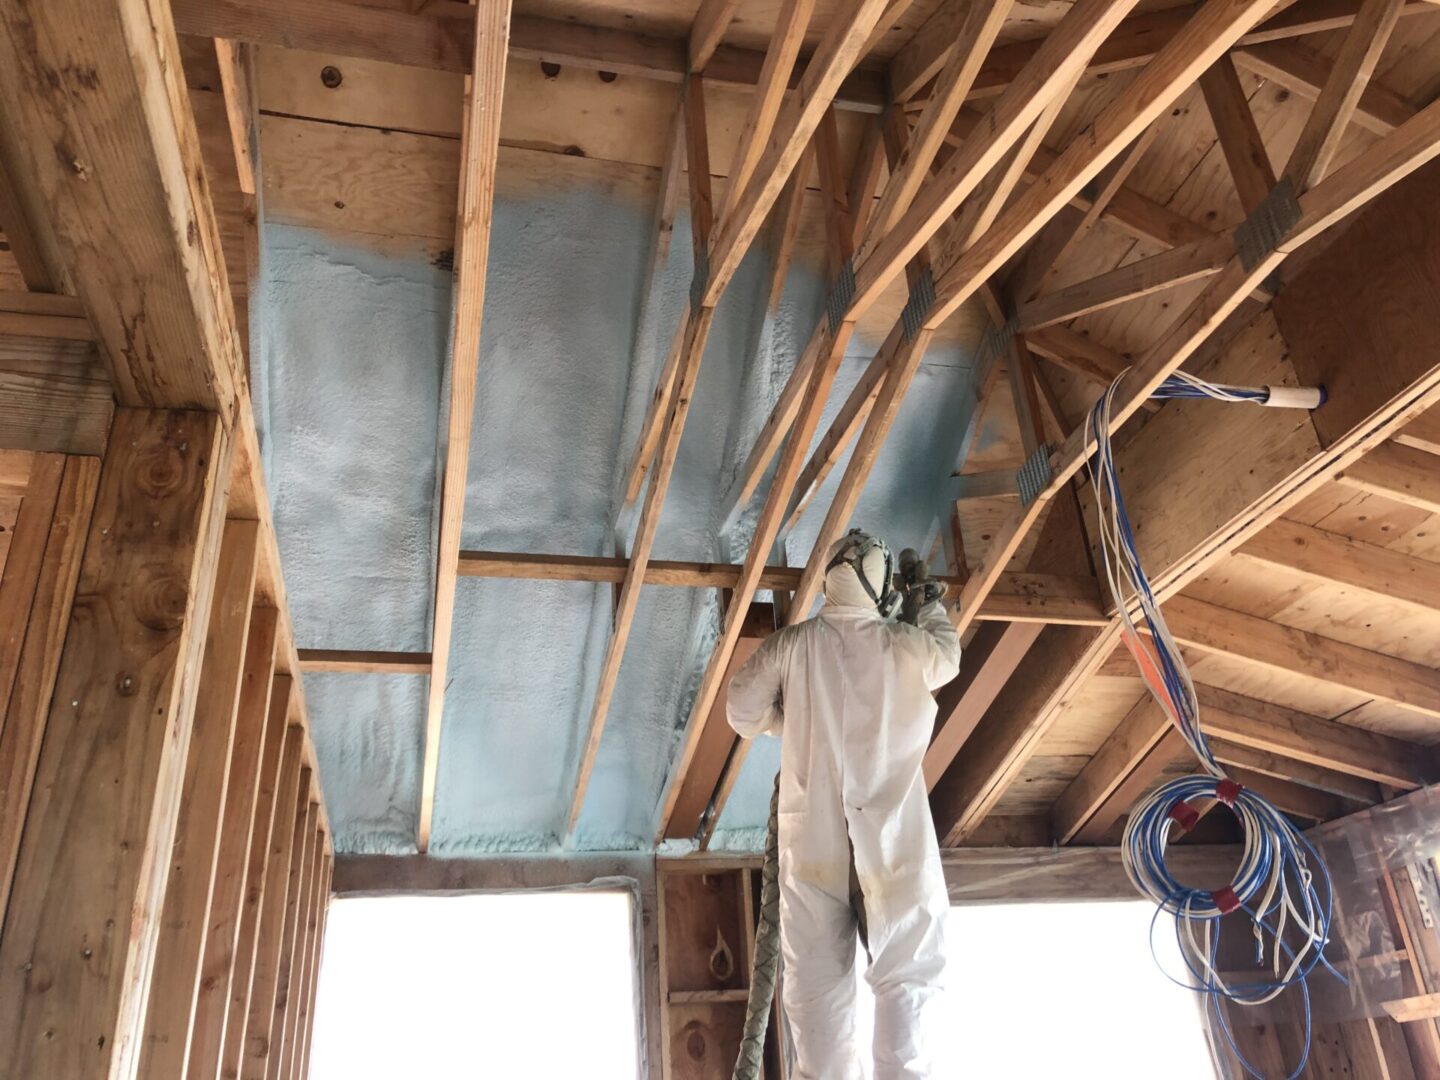 spraying insulation on ceiling